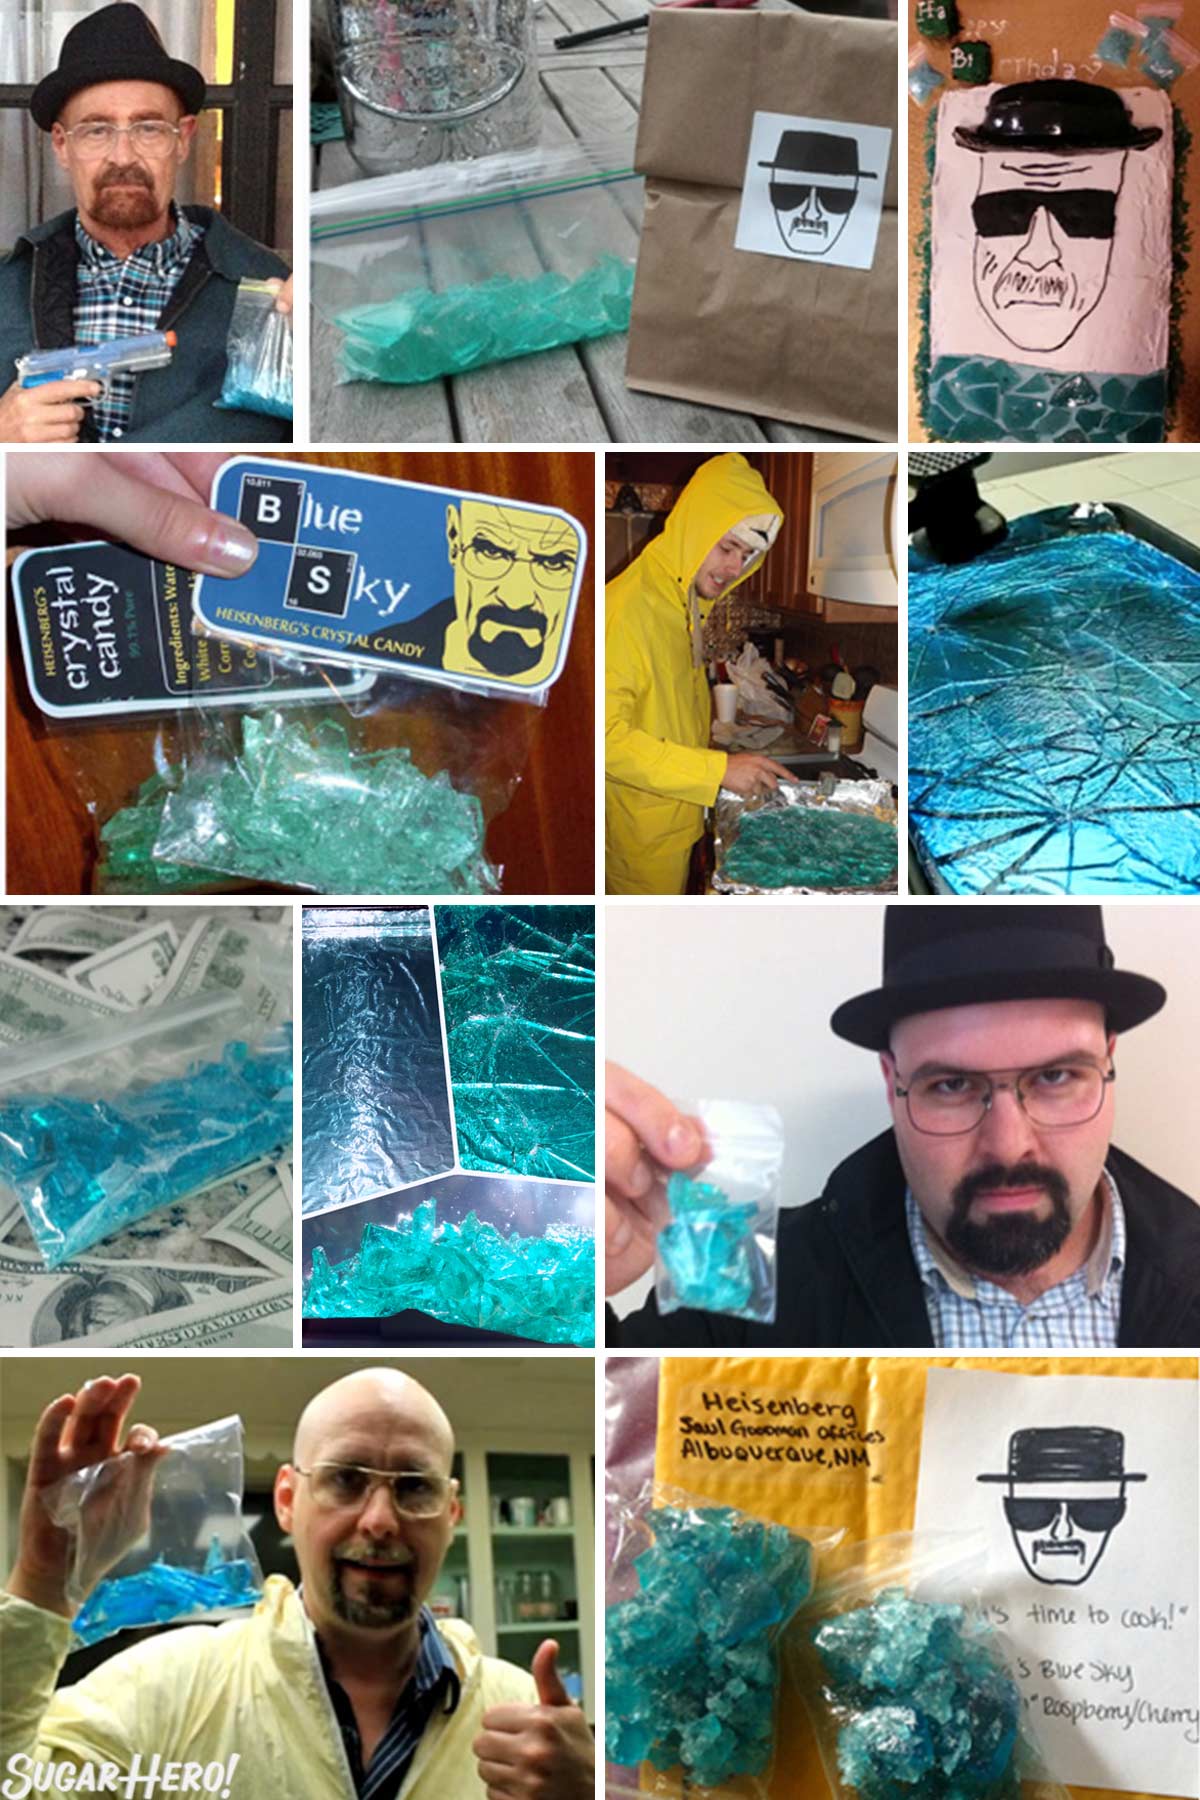 Photo collage of blue rock candy and people dressed as characters from Breaking Bad.